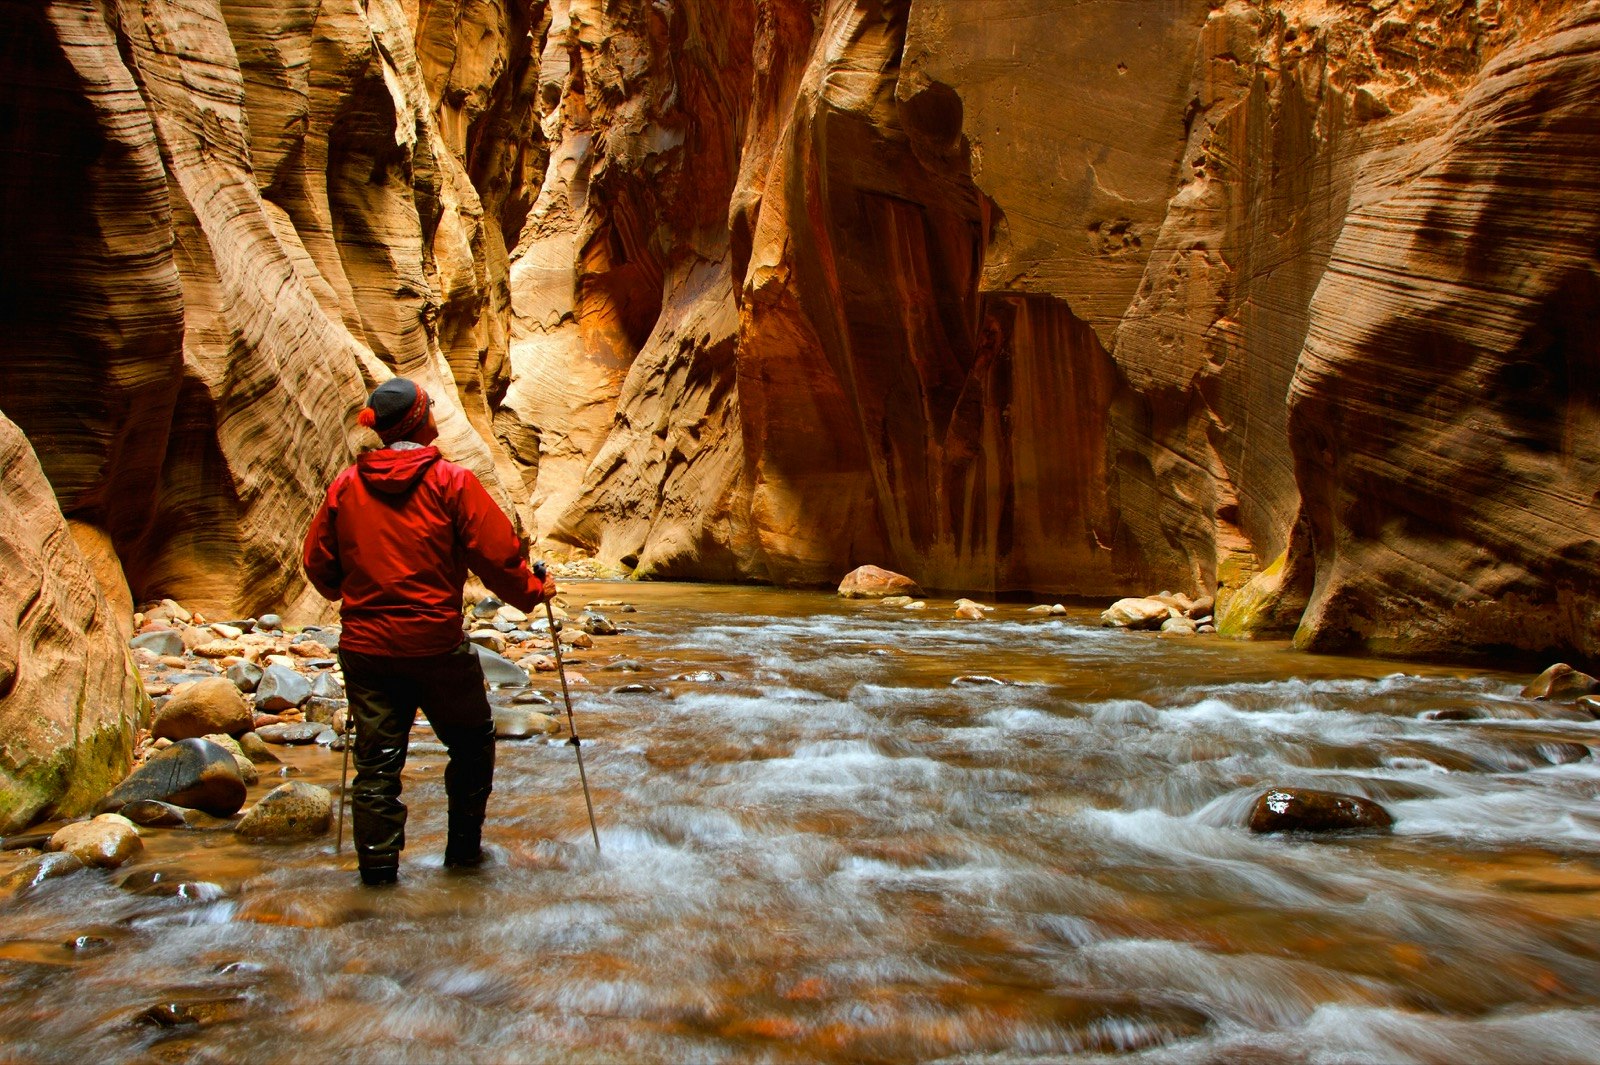 A man hikes through a river into the narrows in Zion National Park, Utah USA.